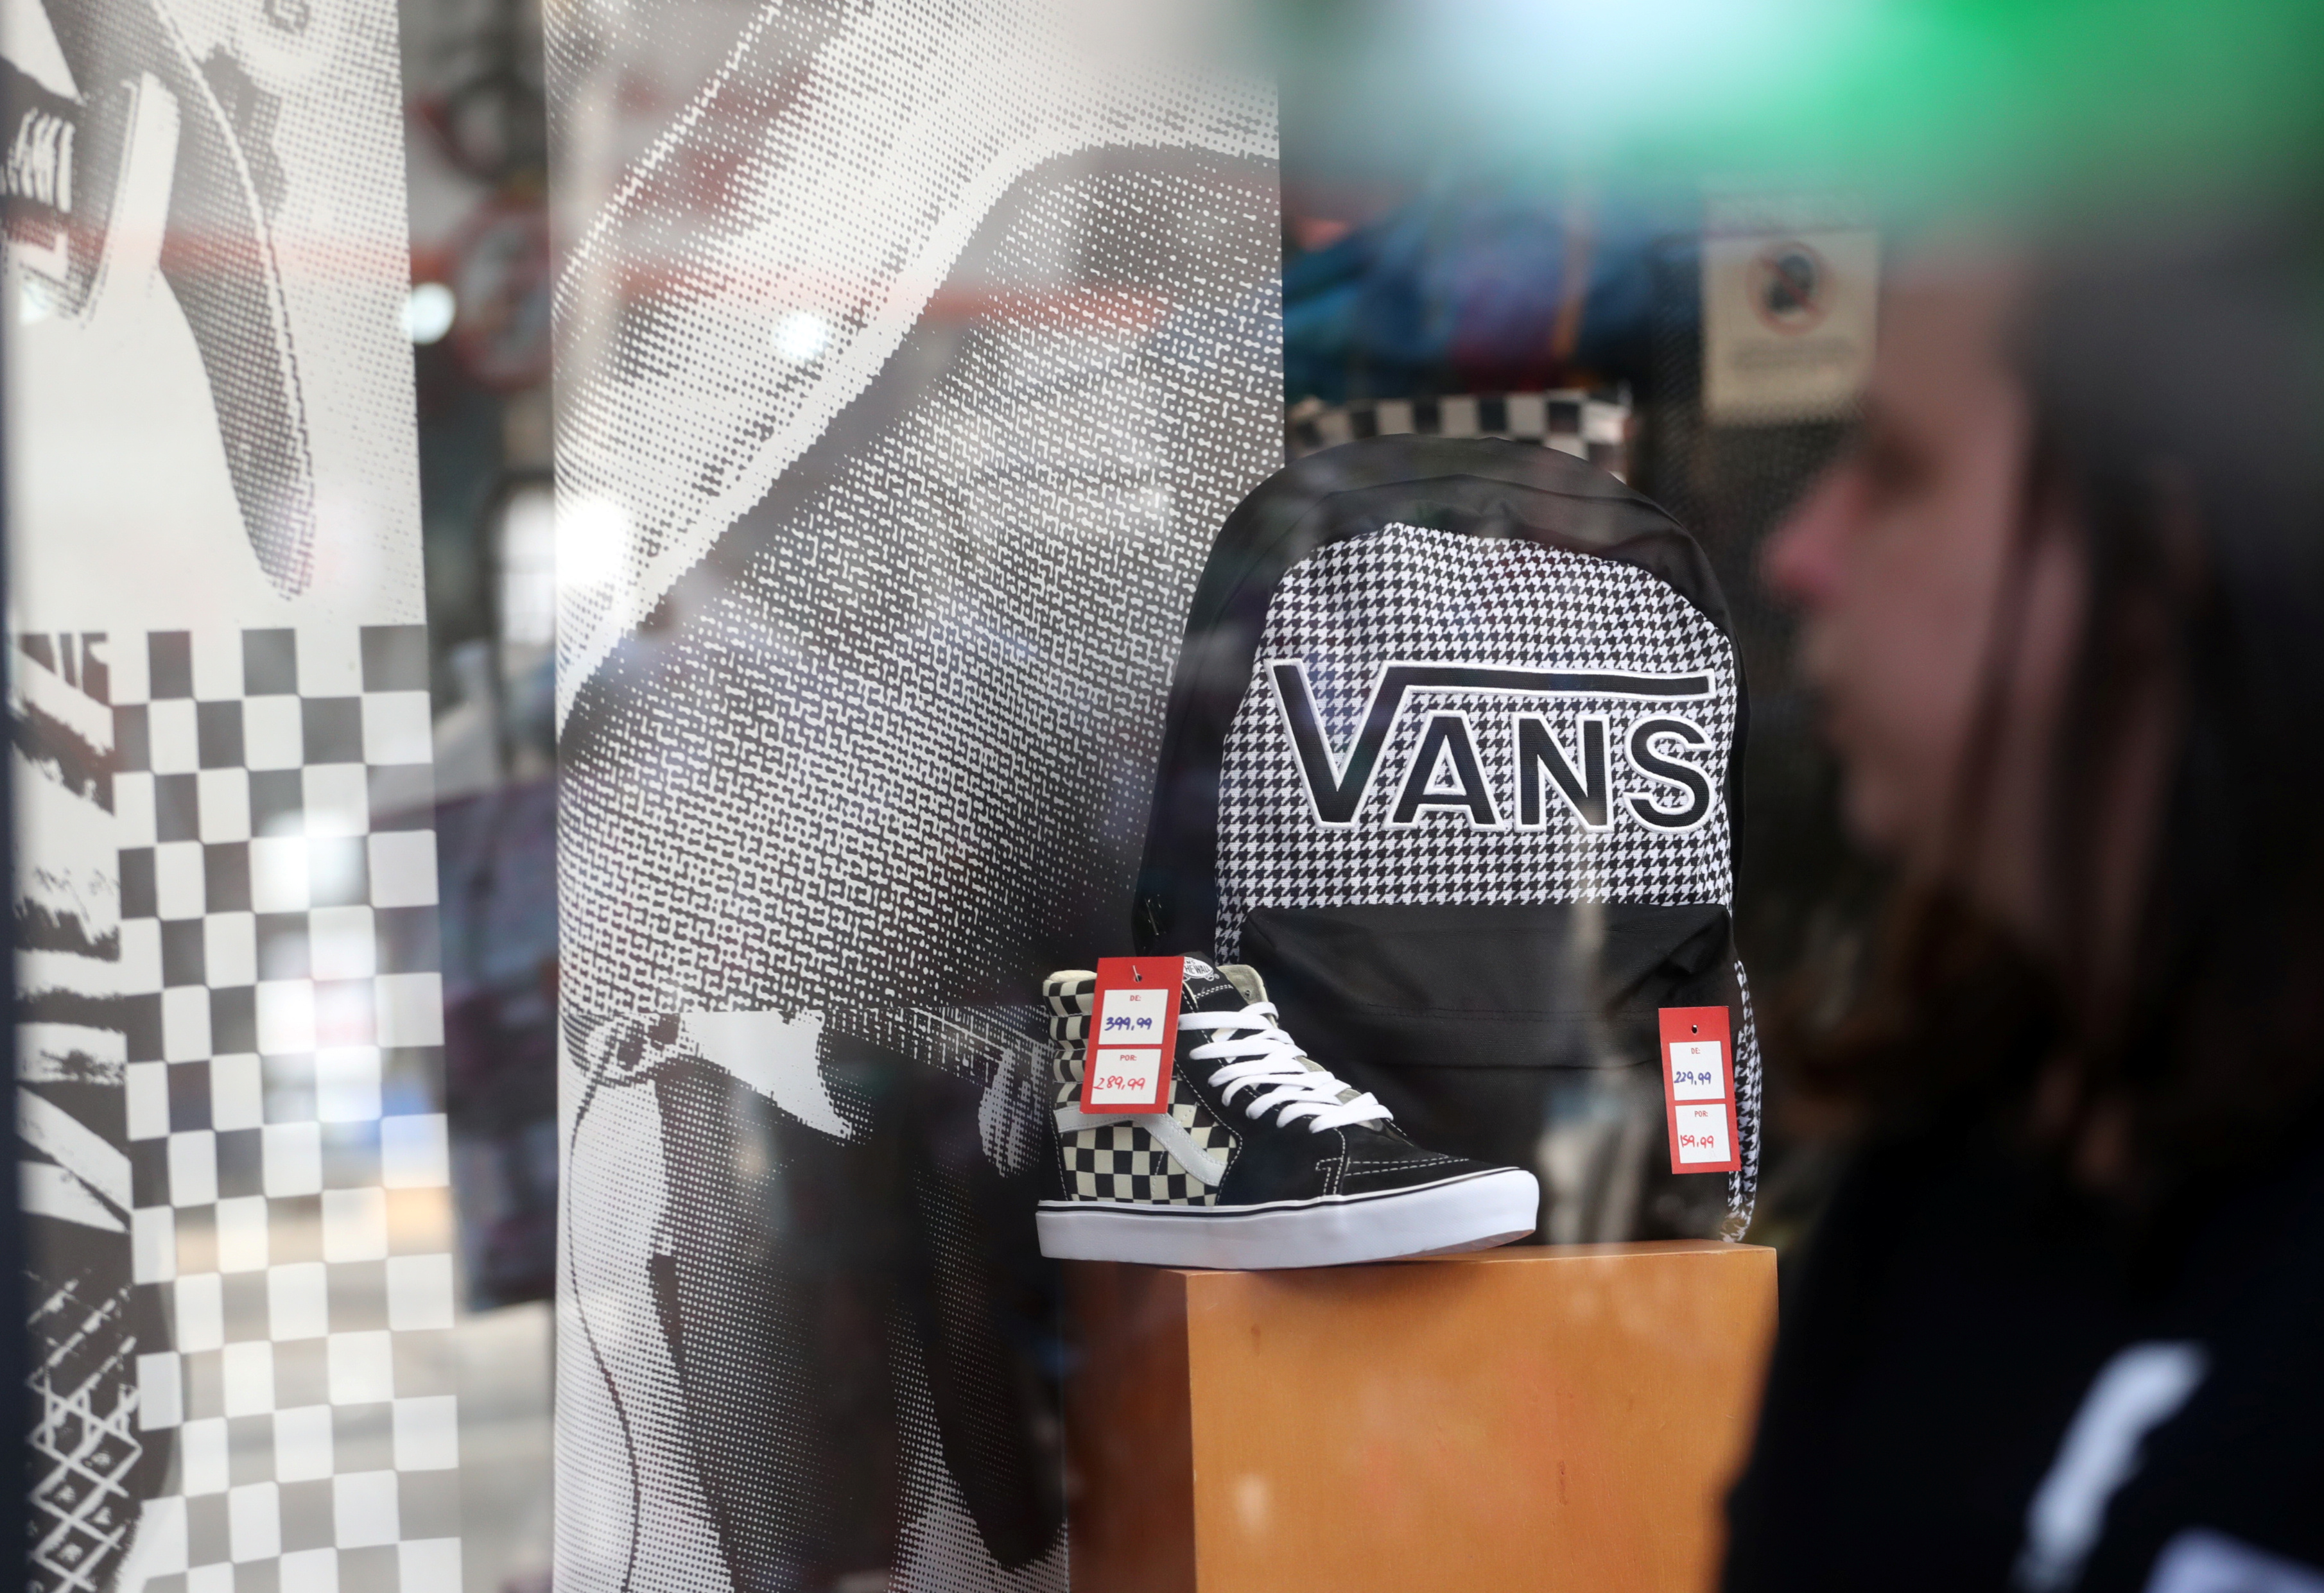 VF Corp : Vans results are 'not where we should be